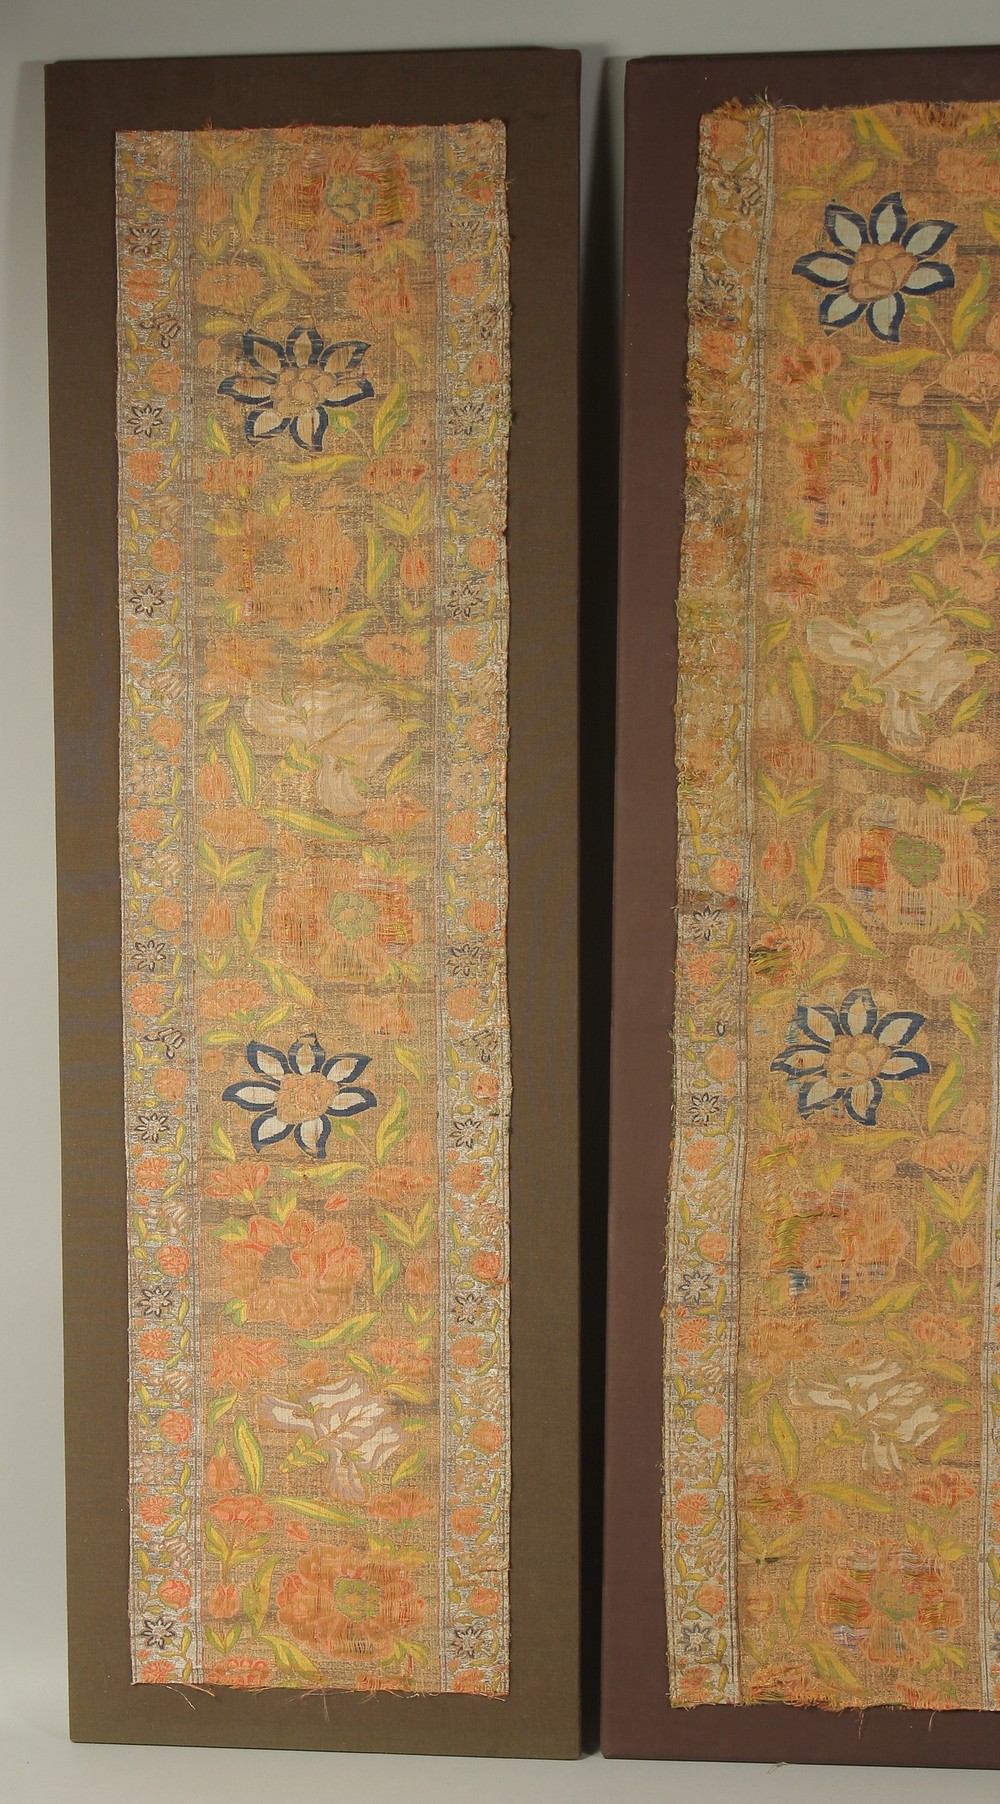 A COLLECTION OF THREE FINE 17TH CENTURY METAL THREAD AND SILK EMBROIDERED PERSIAN SAFAVID TEXTILE - Image 2 of 4